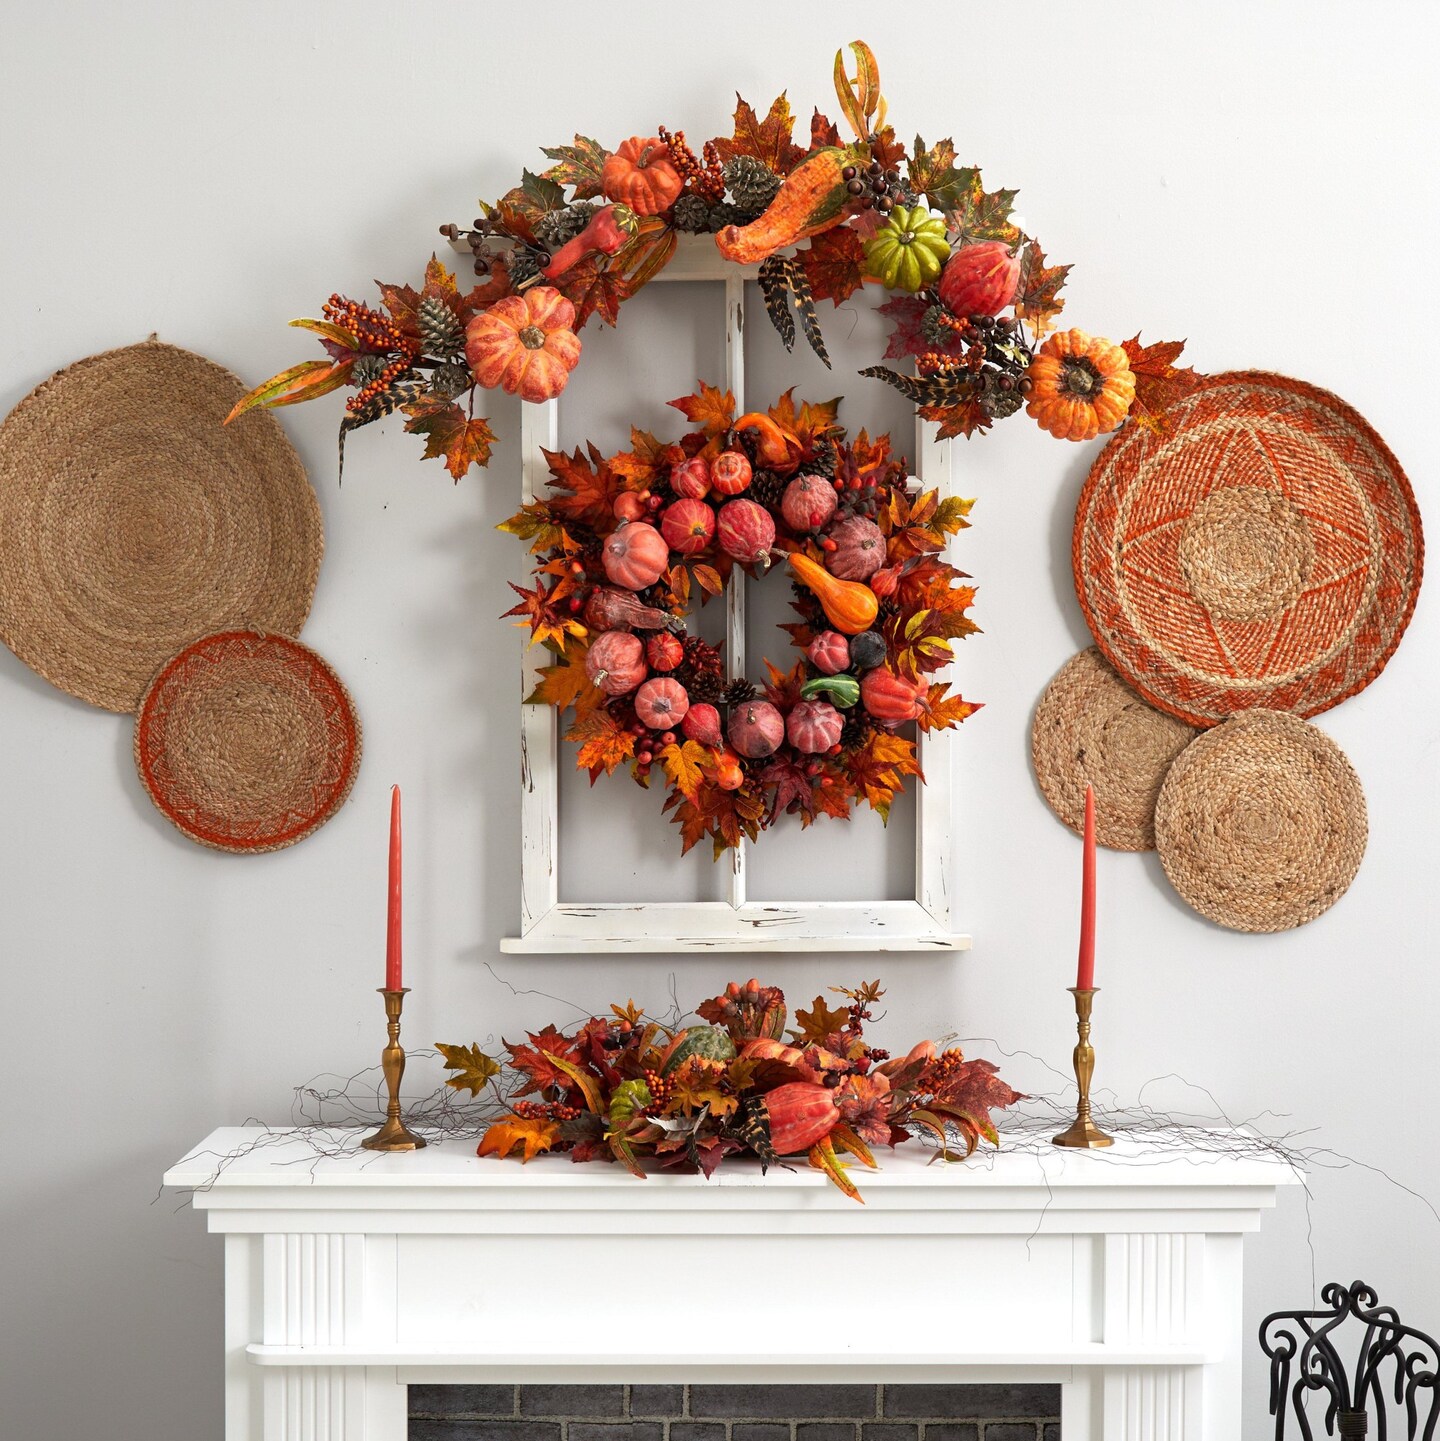 Fall Wreath from a Wood Cheese Box for Rustic and Welcoming Decor